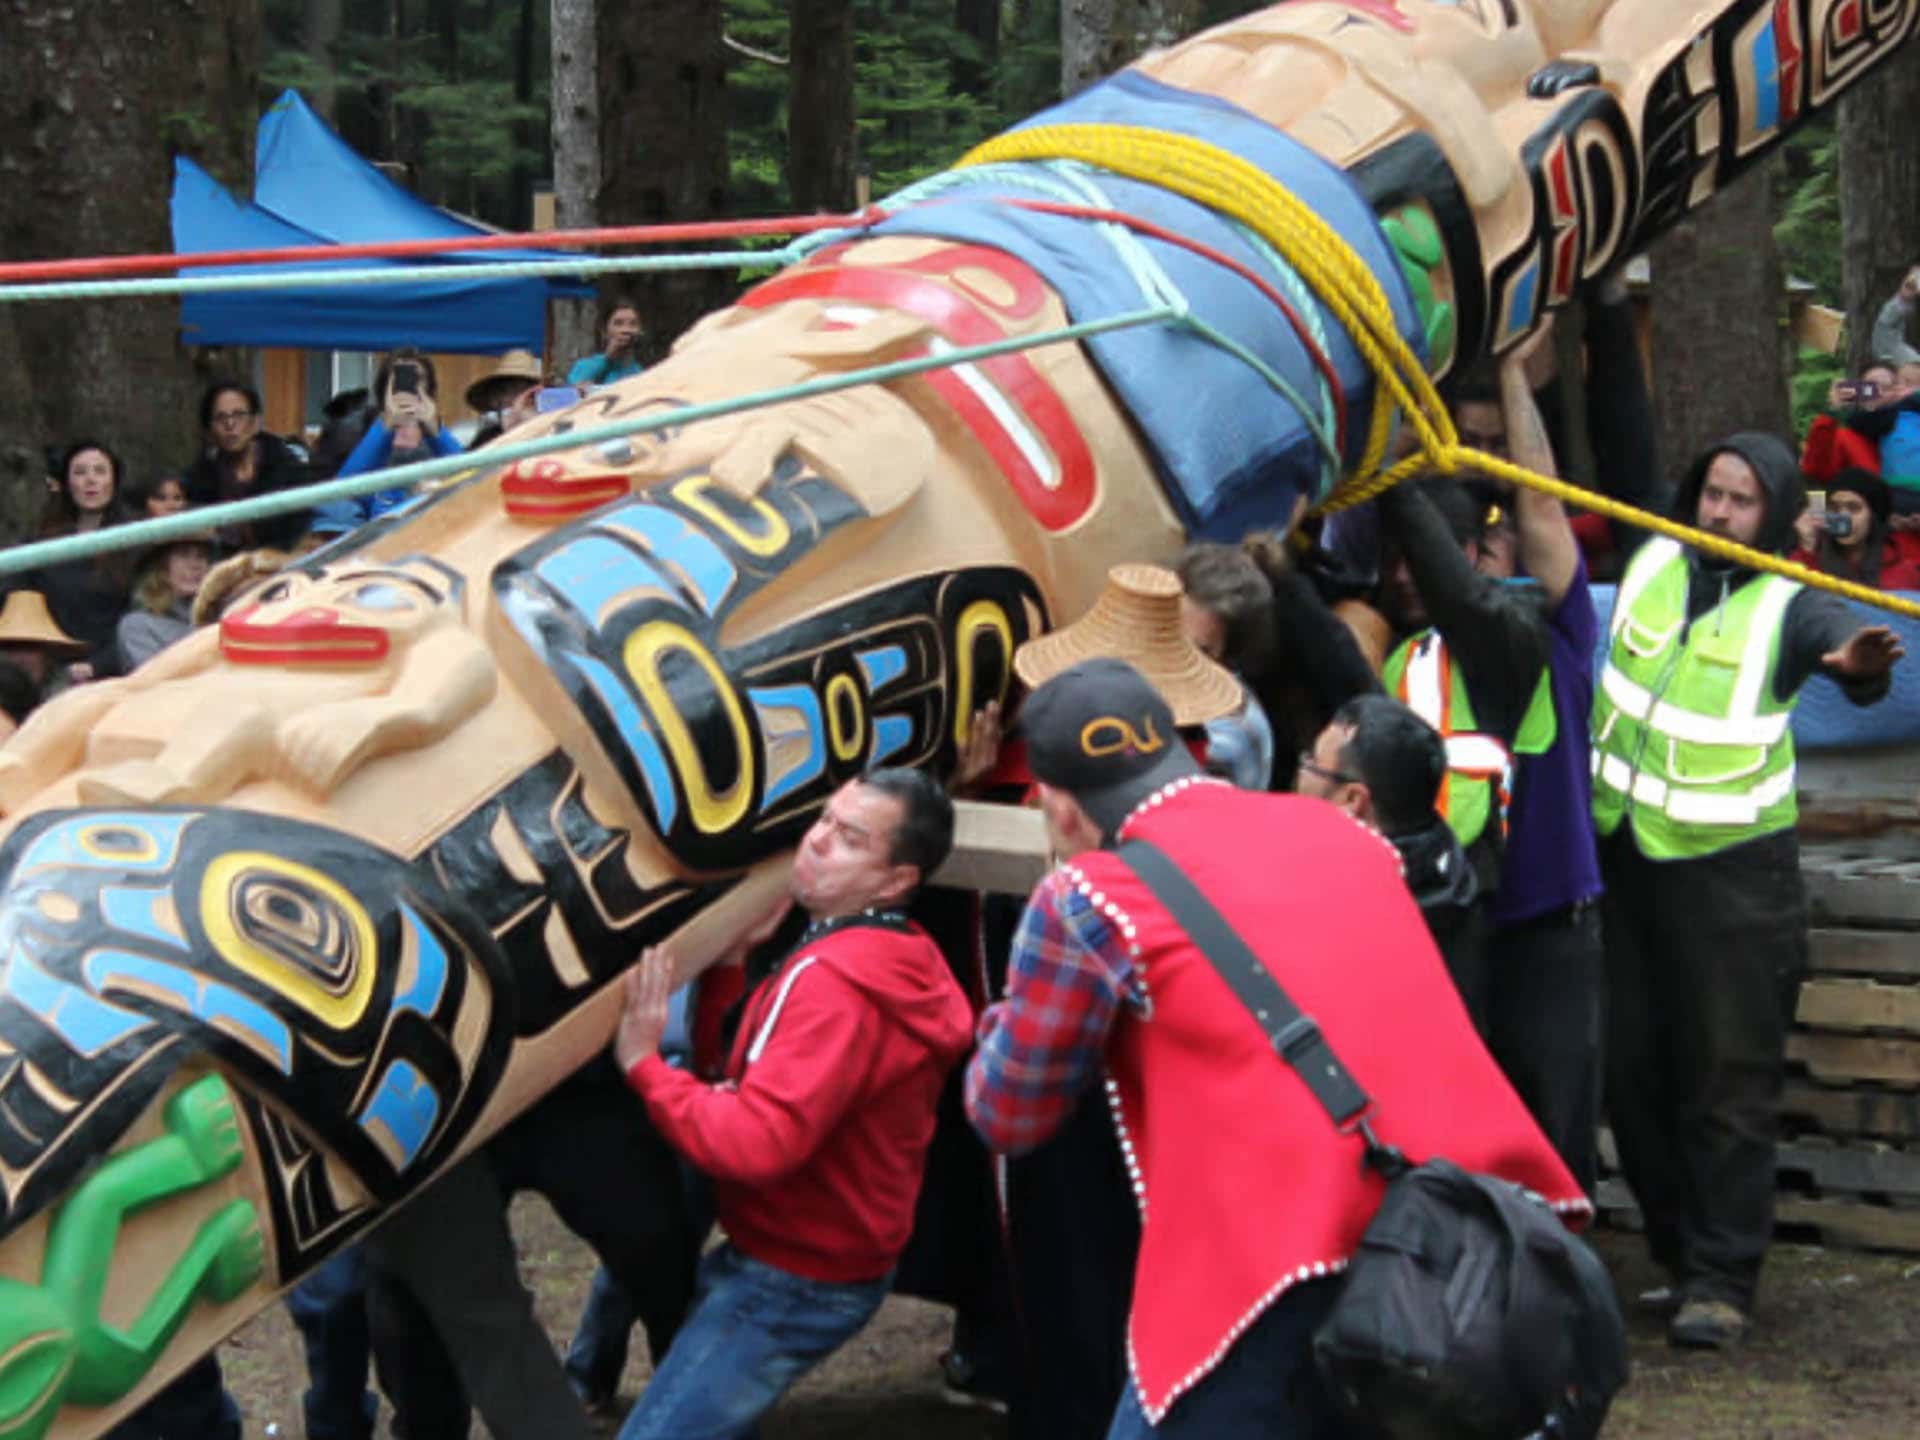 On June 21, 2017, Haida citizens directed the efforts of hundreds of people using five ropes to raise a new totem pole at Hiellen Longhouse Village (Photo: Coast Funds)